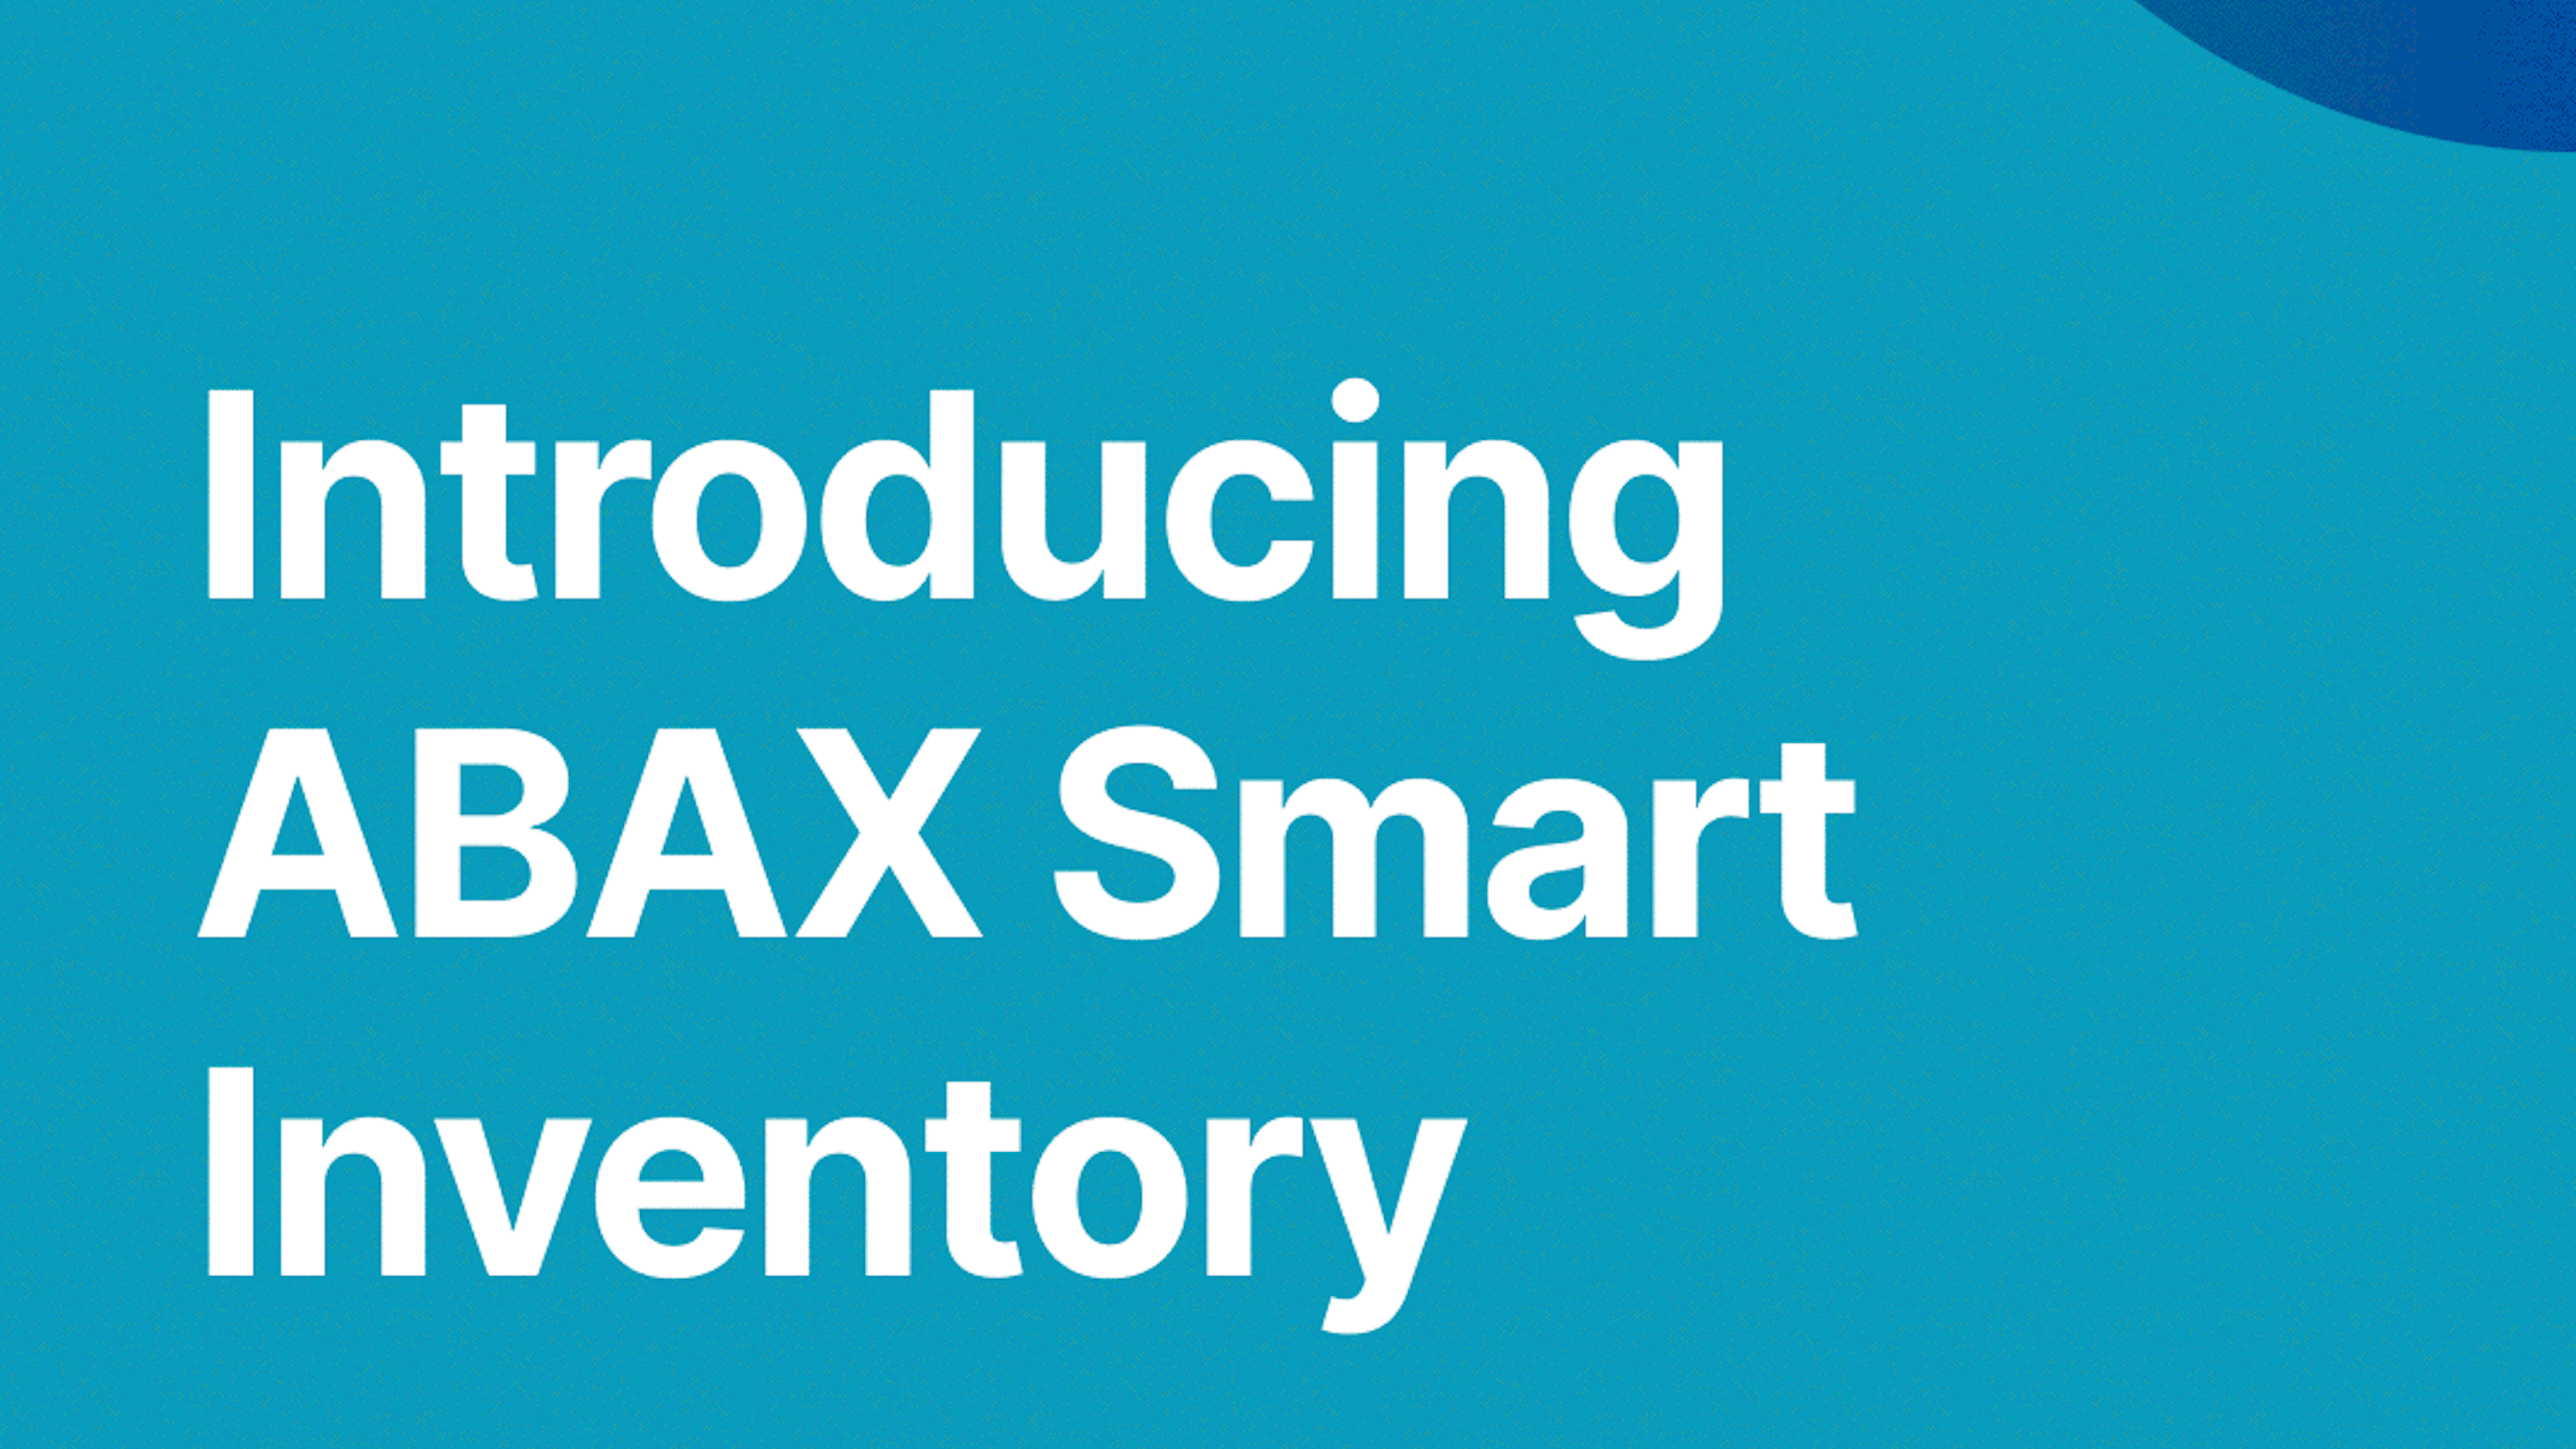 ABAX Launches first-of-its-kind inventory solution in the UK